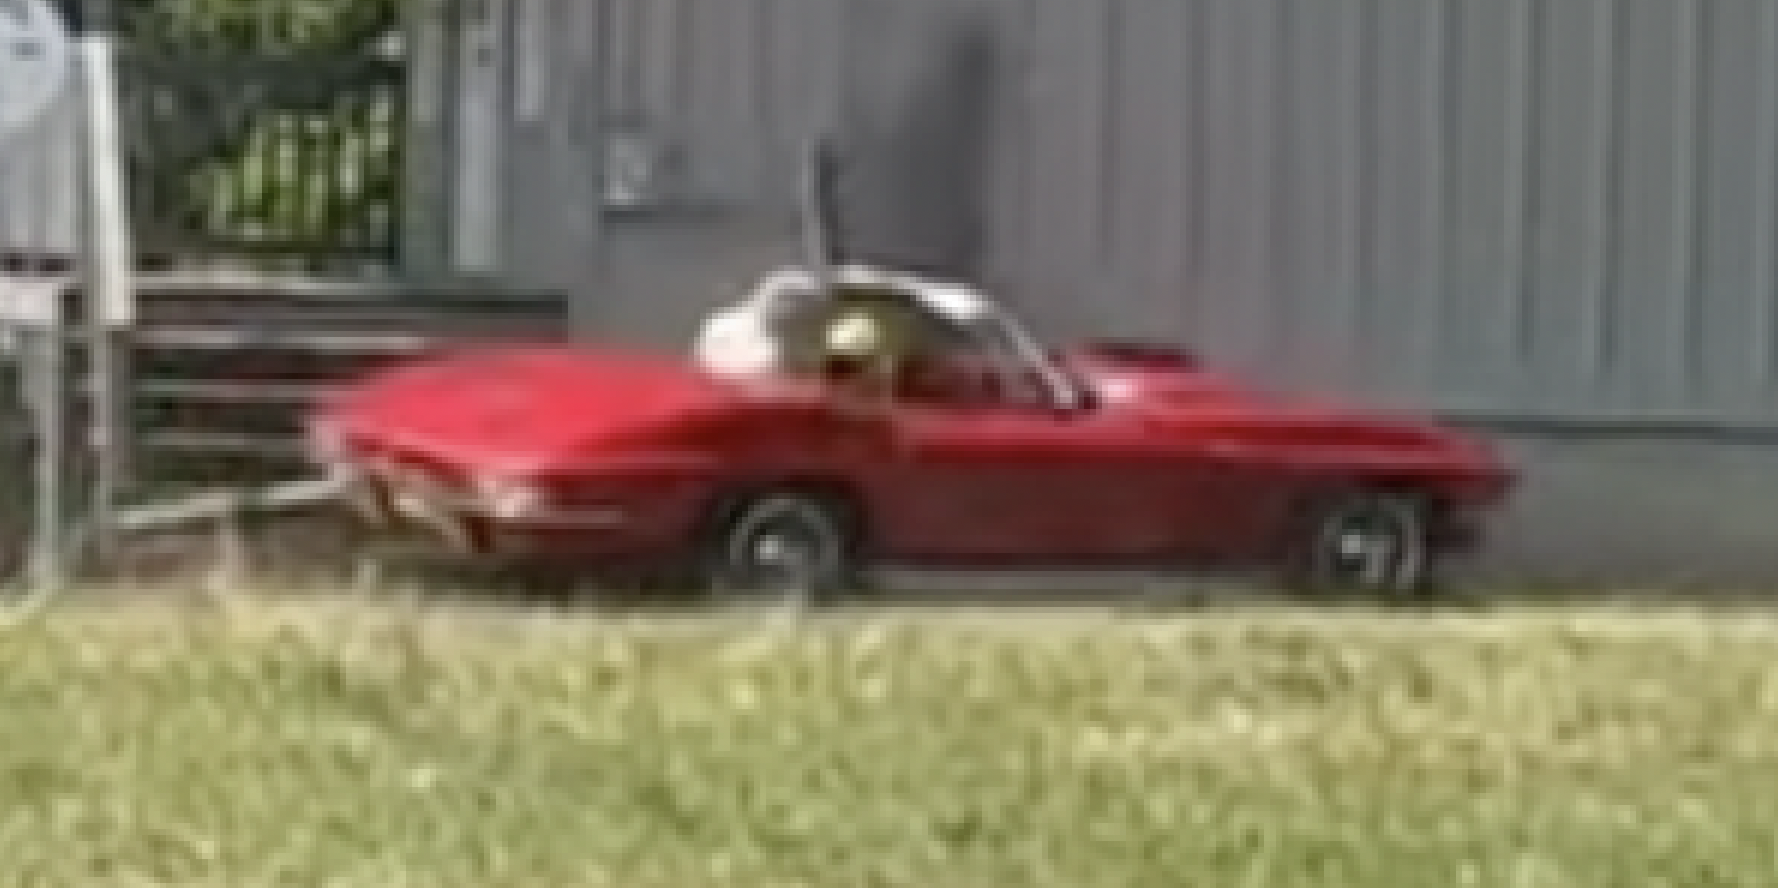 Beautiful C2 Corvette Stingray Loses Control Leaving Car Show and Crashes Into House